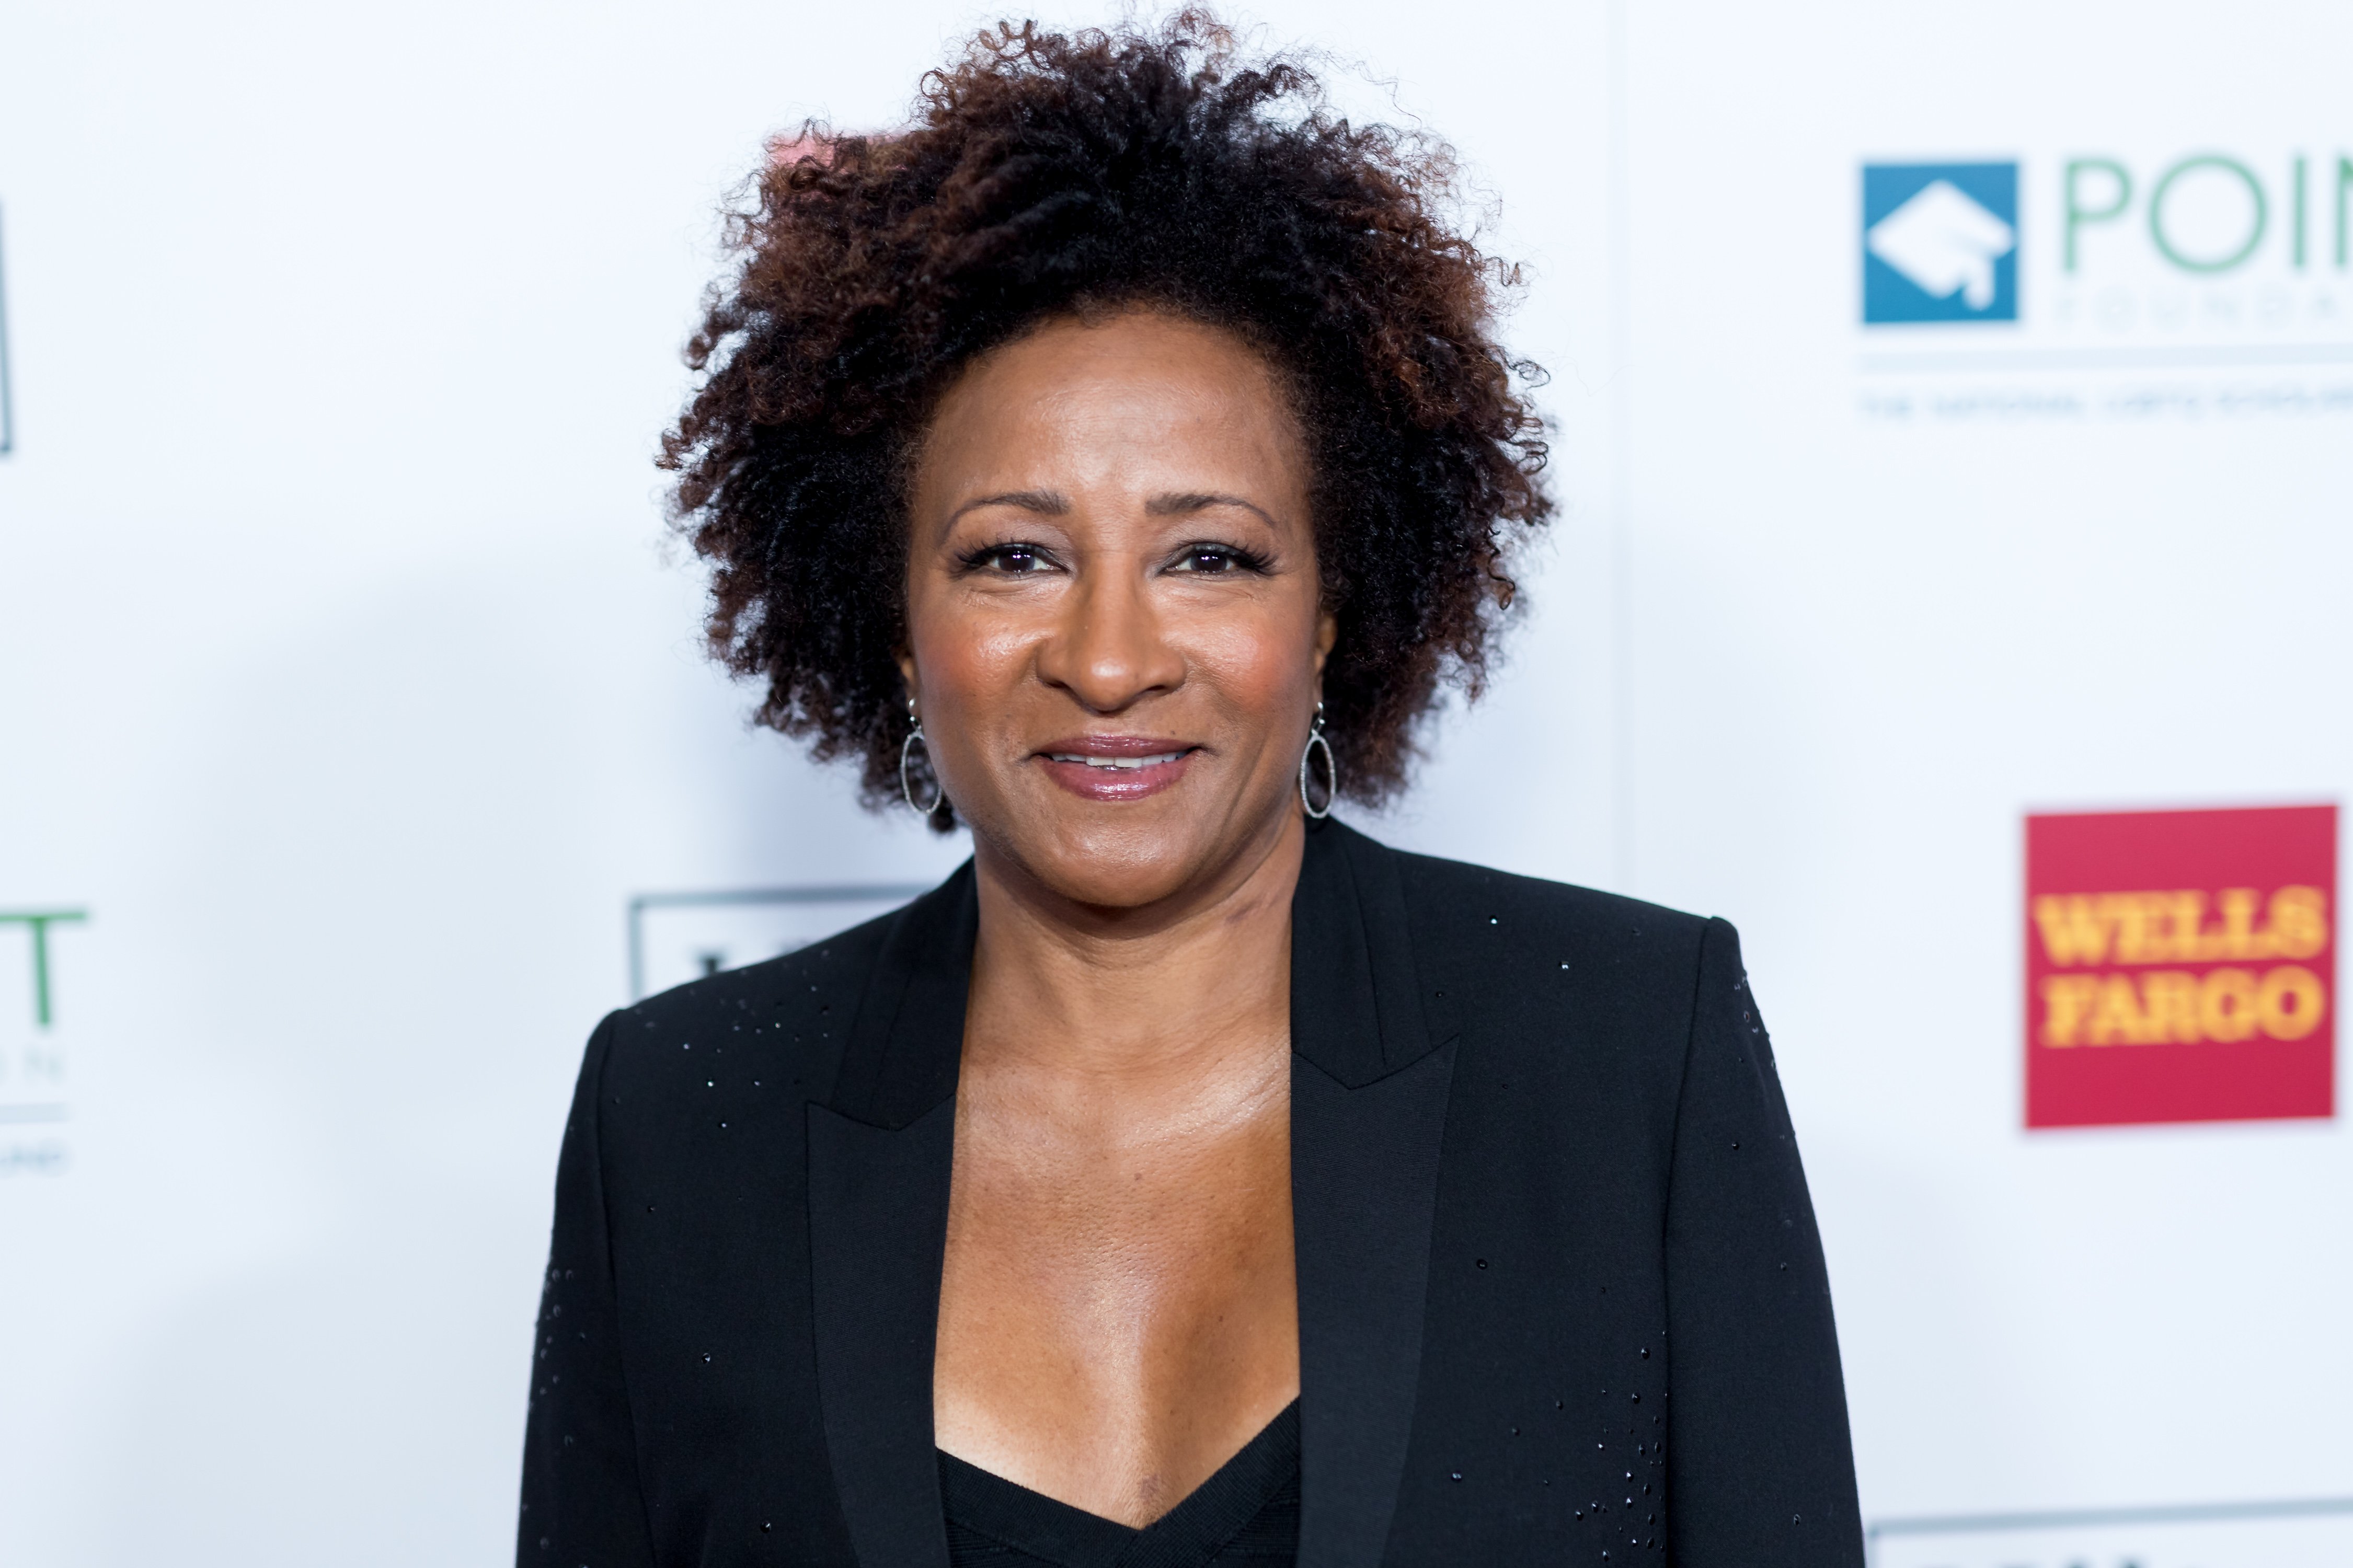 Wanda Sykes at the Point Honors Los Angeles where she was an honoree in 2017. | Photo: Getty Images